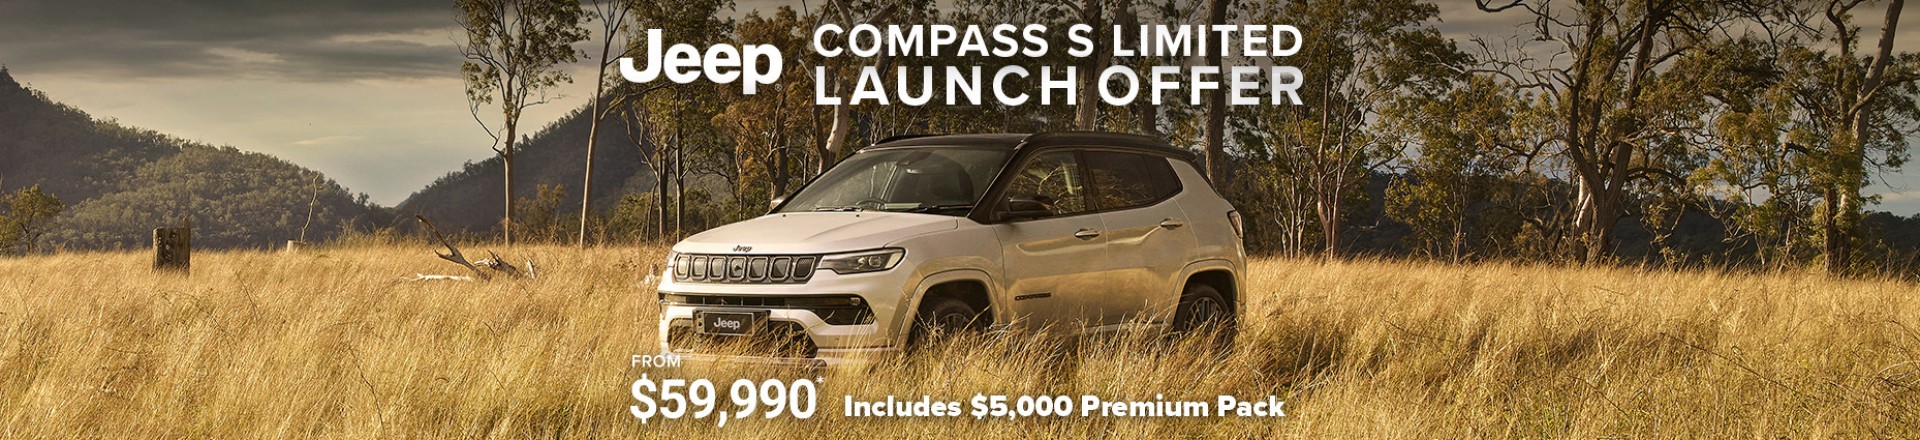 Compass S Limited Launch Offer